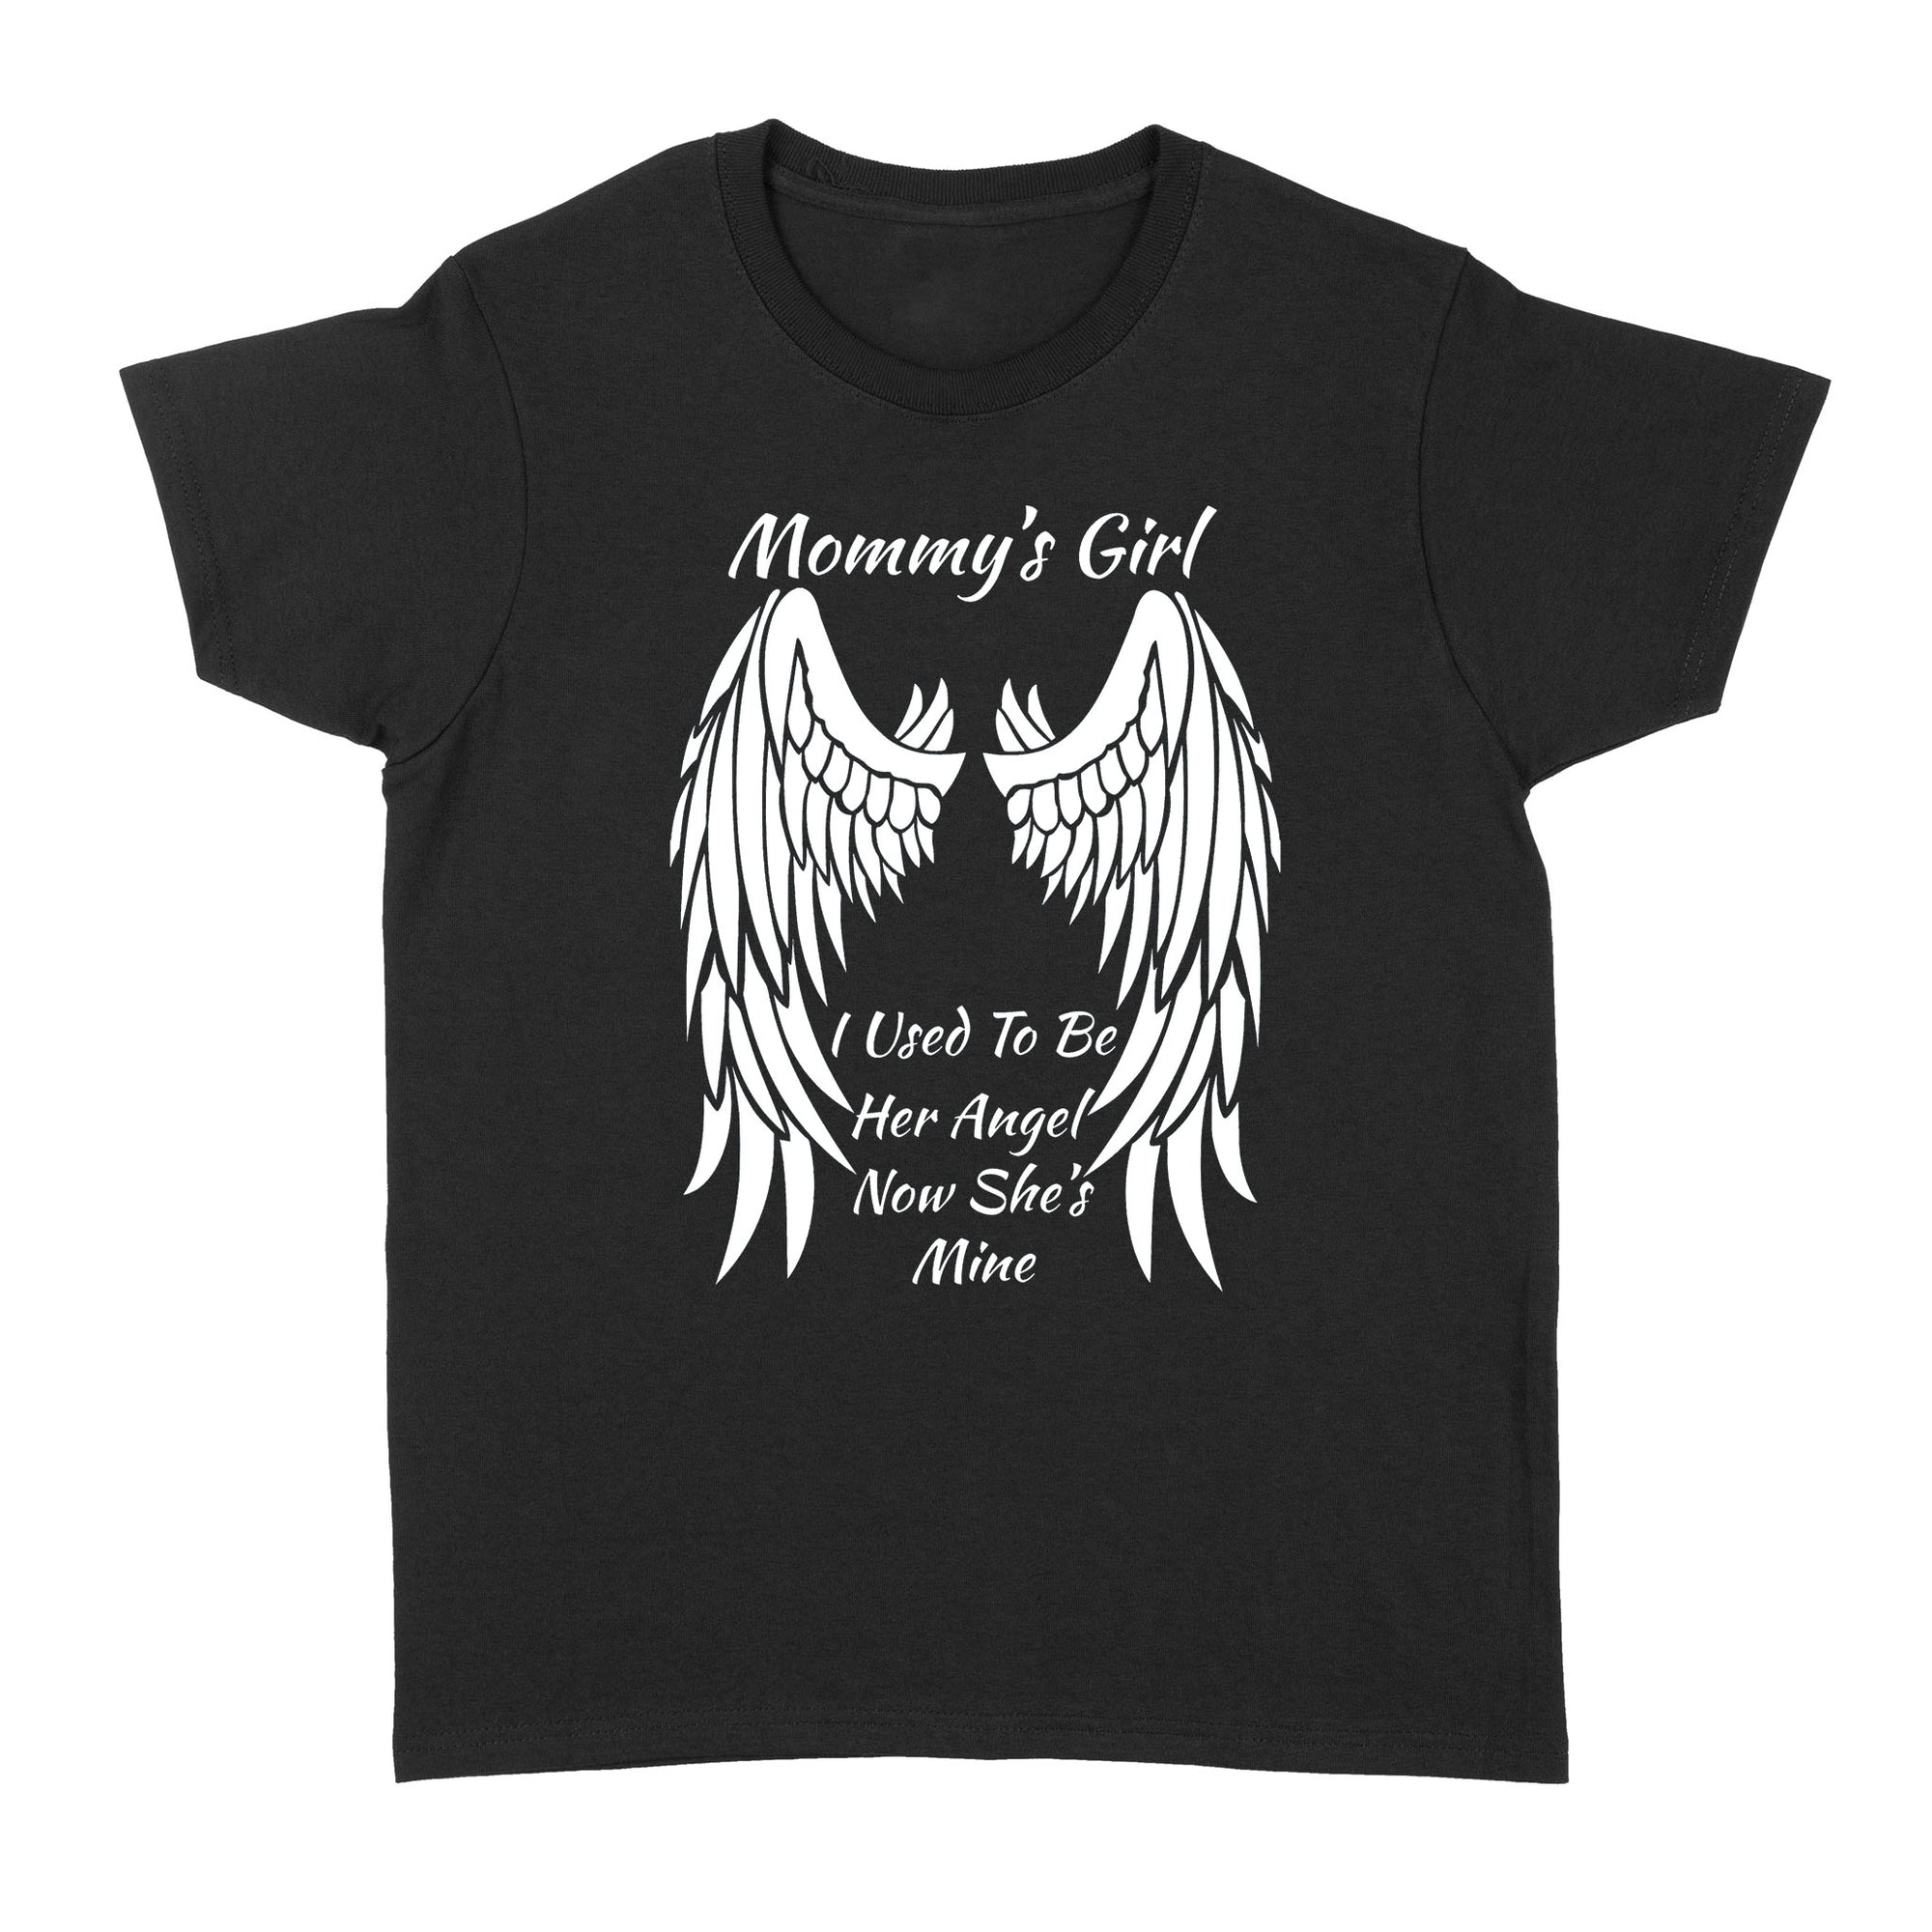 Gift Ideas for Daughter Mommy's Girl I Used To Be Her Angle Now She's Mine - Standard Women's T-shirt